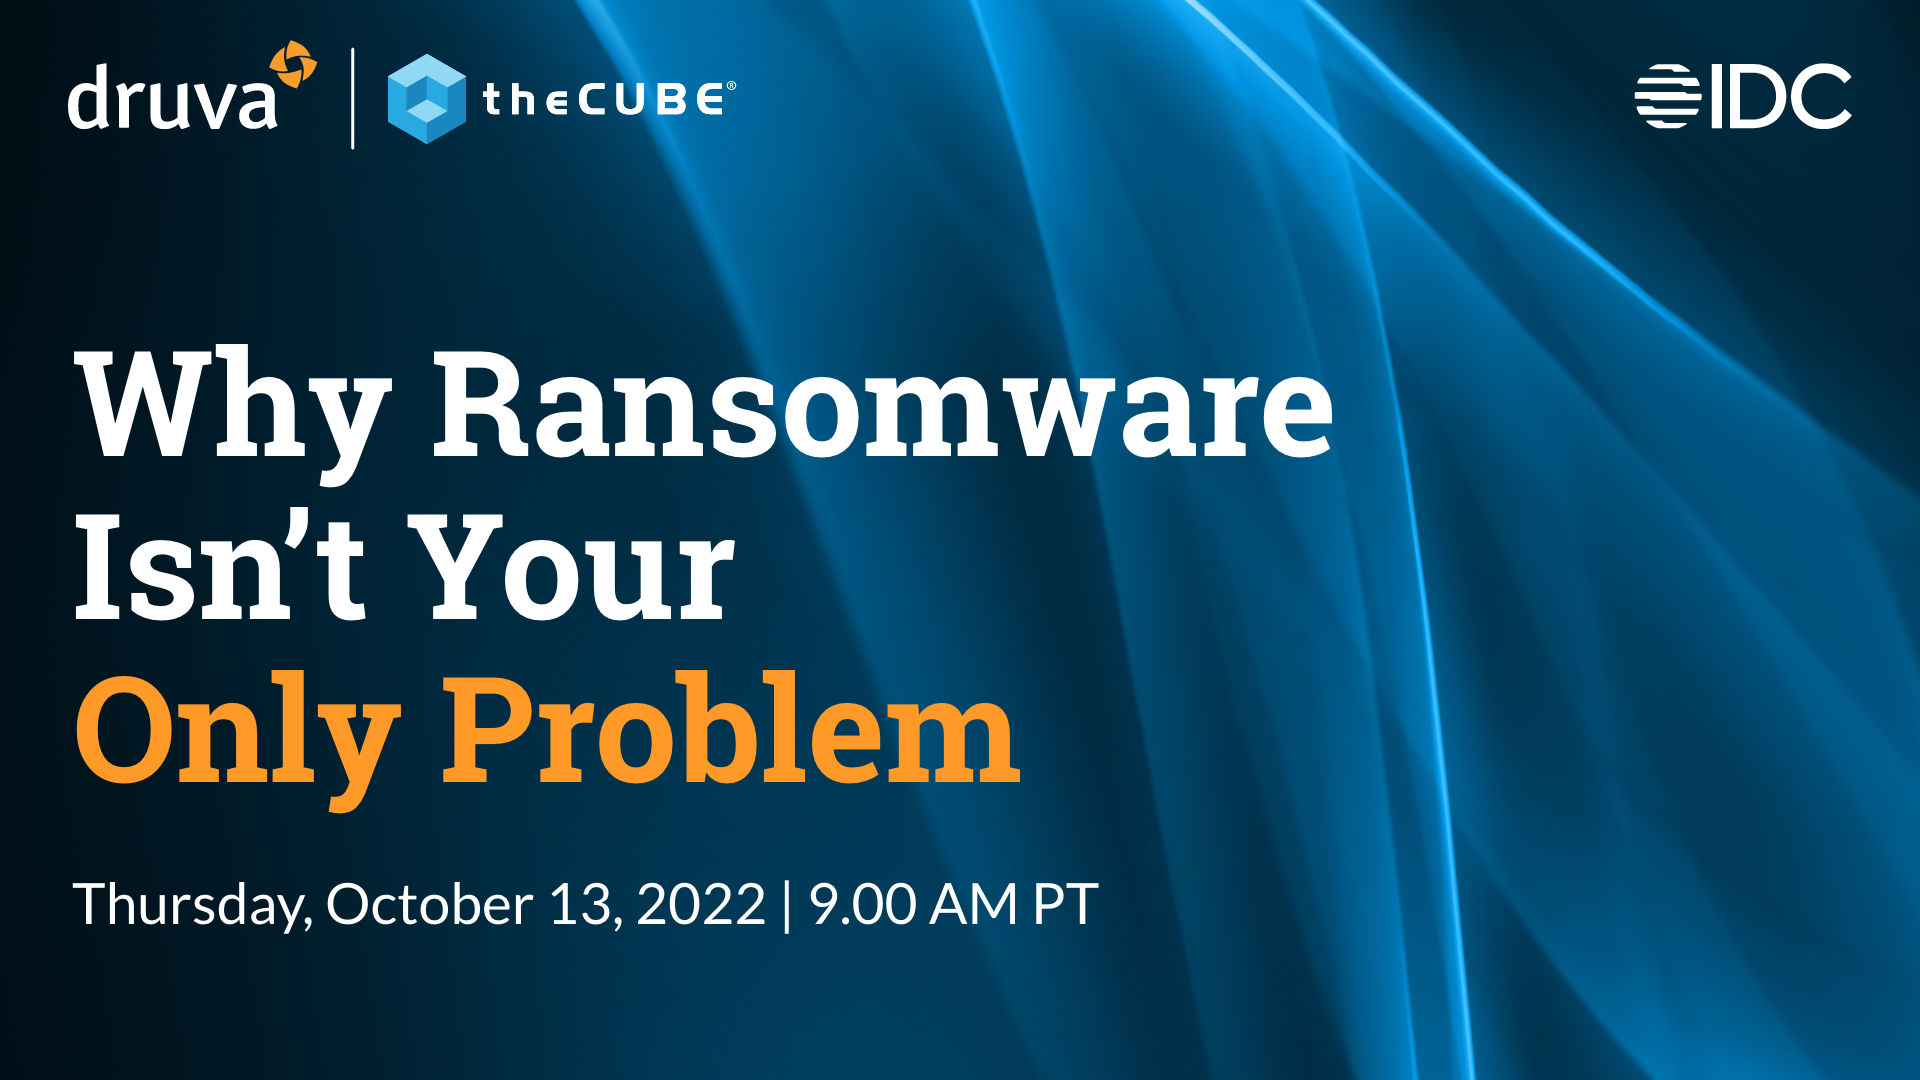 What to expect at ‘Why Ransomware Isn’t Your Only Problem’: Join theCUBE Oct. 13